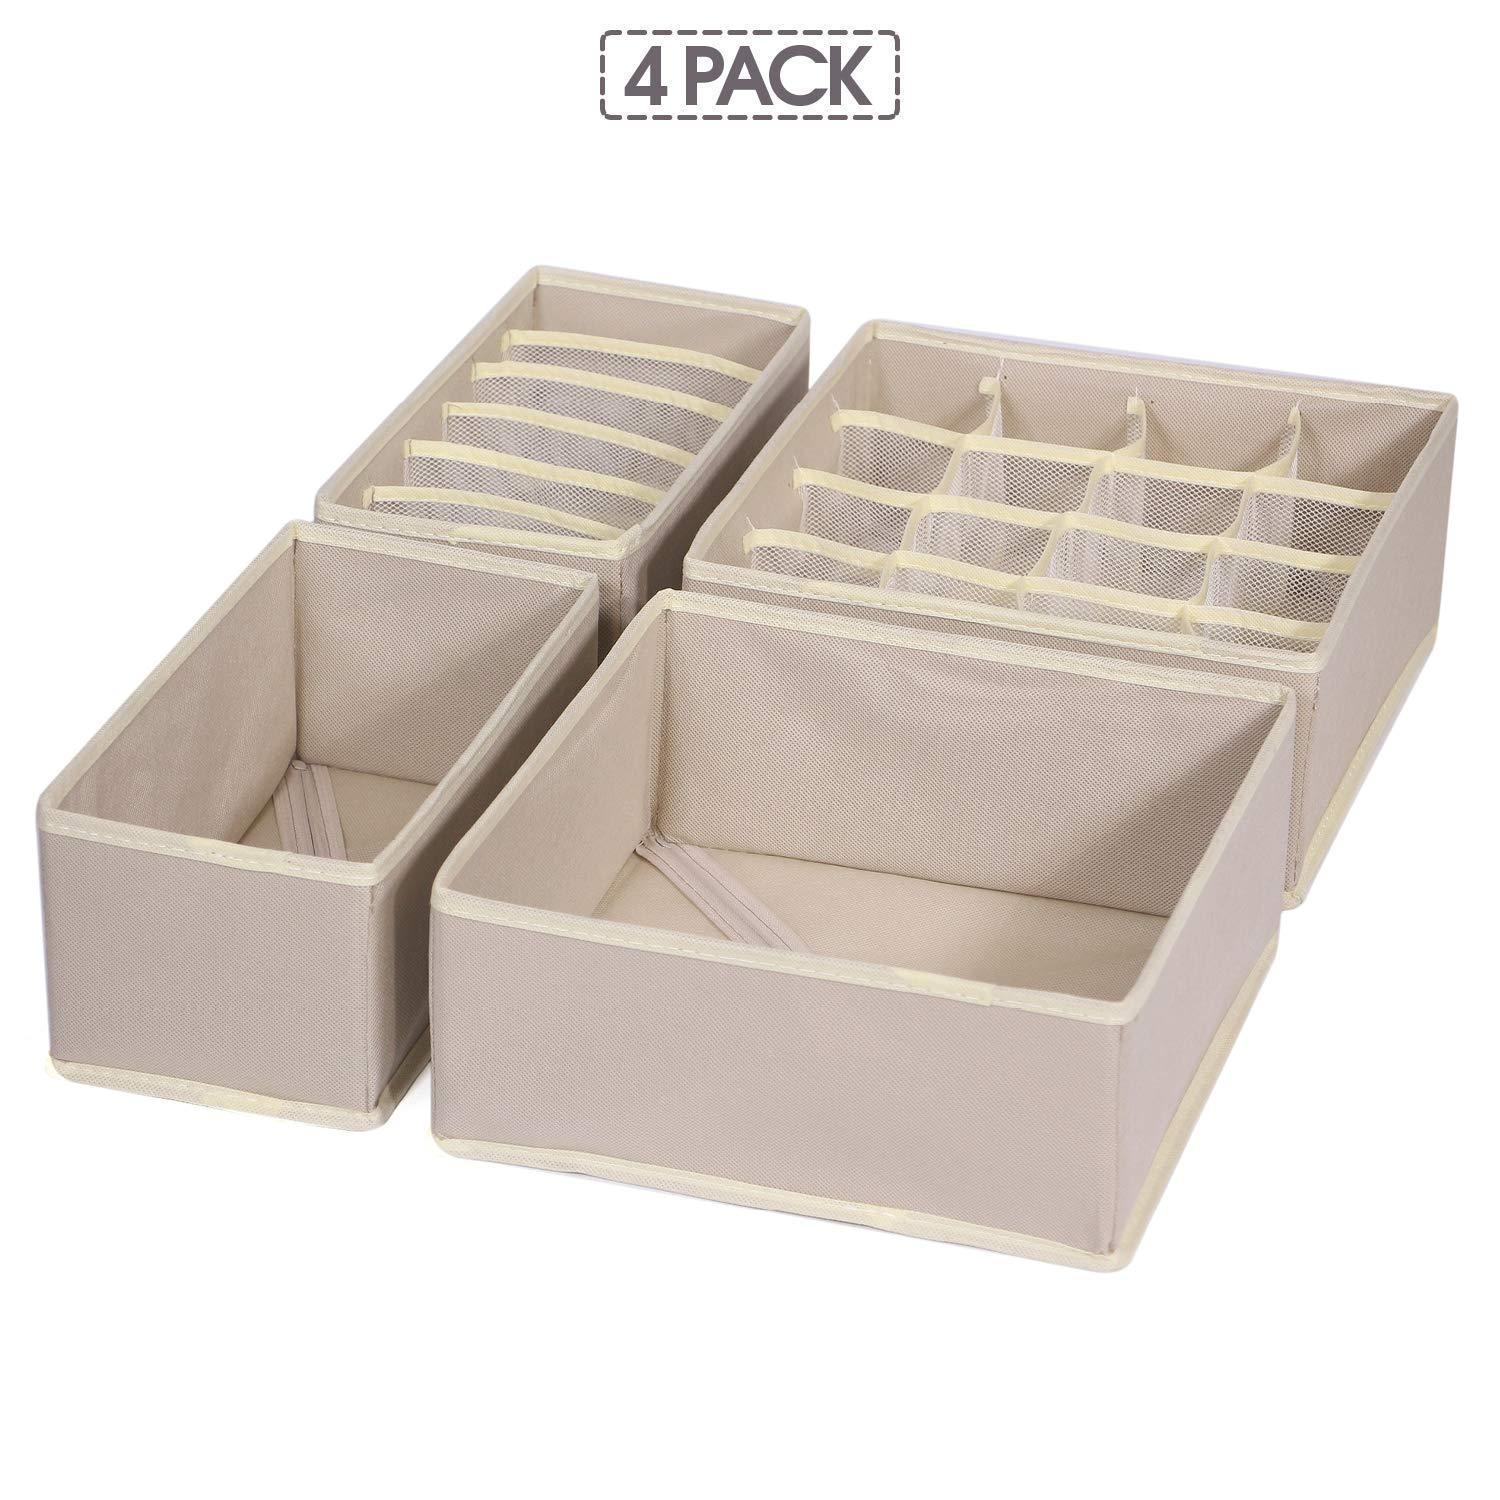 The best tenabort foldable drawer organizer dividers cloth storage box closet dresser organizer cube fabric containers basket bins for underwear bras socks panties lingeries nursery baby clothes beige 4 pack